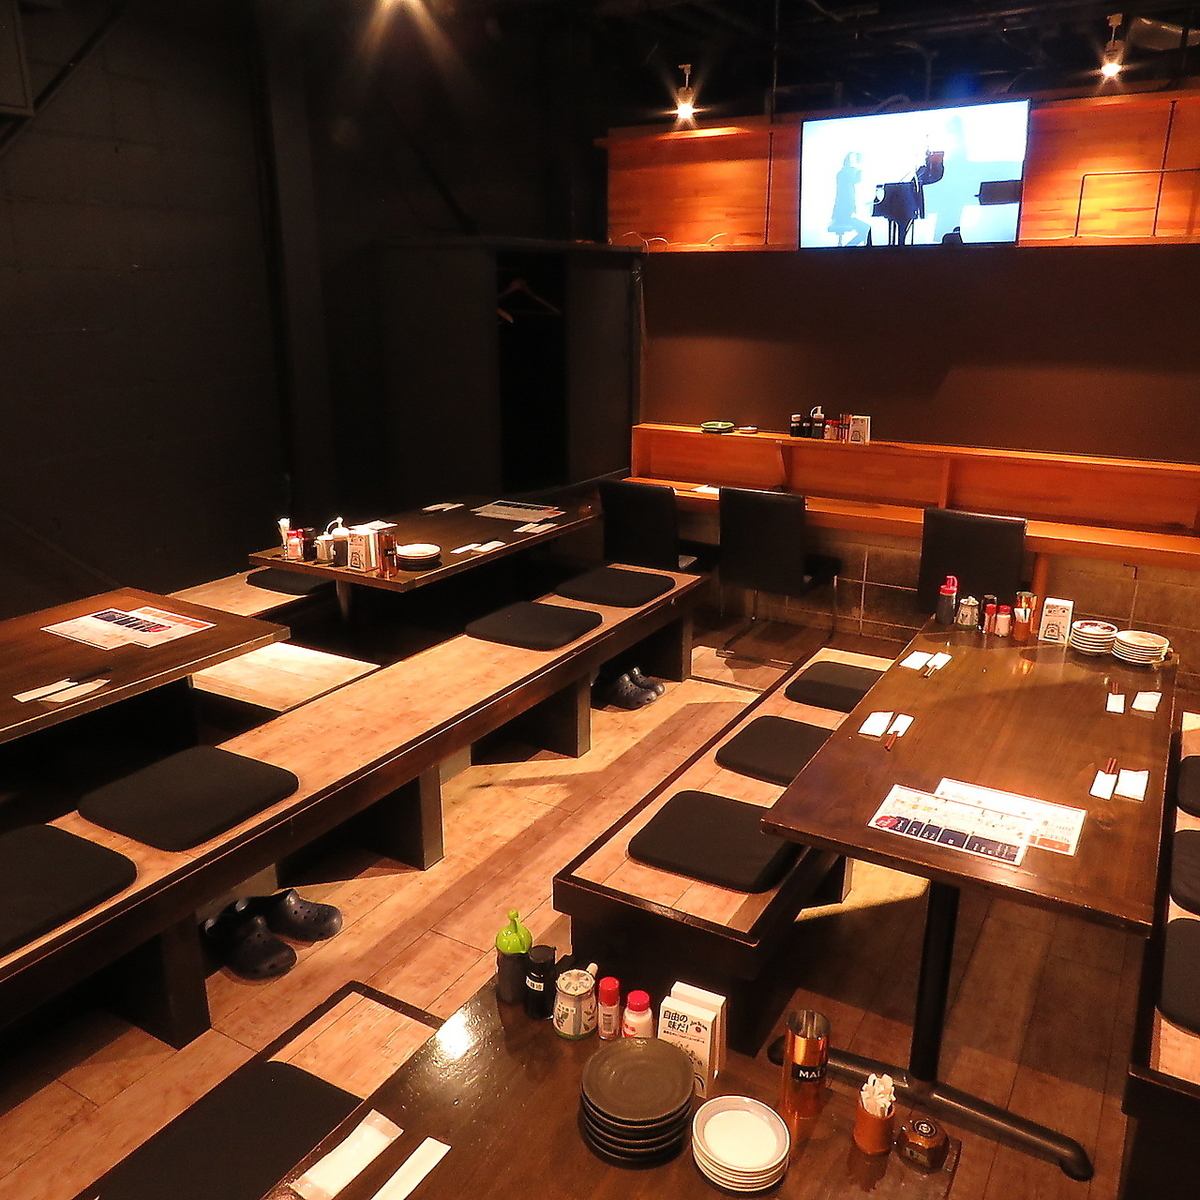 A total of 129 seats ★ Leave it to us if you have a party with a large number of people ♪ Seafood, kushikatsu (deep-fried skewers), Hakata specialties, etc.